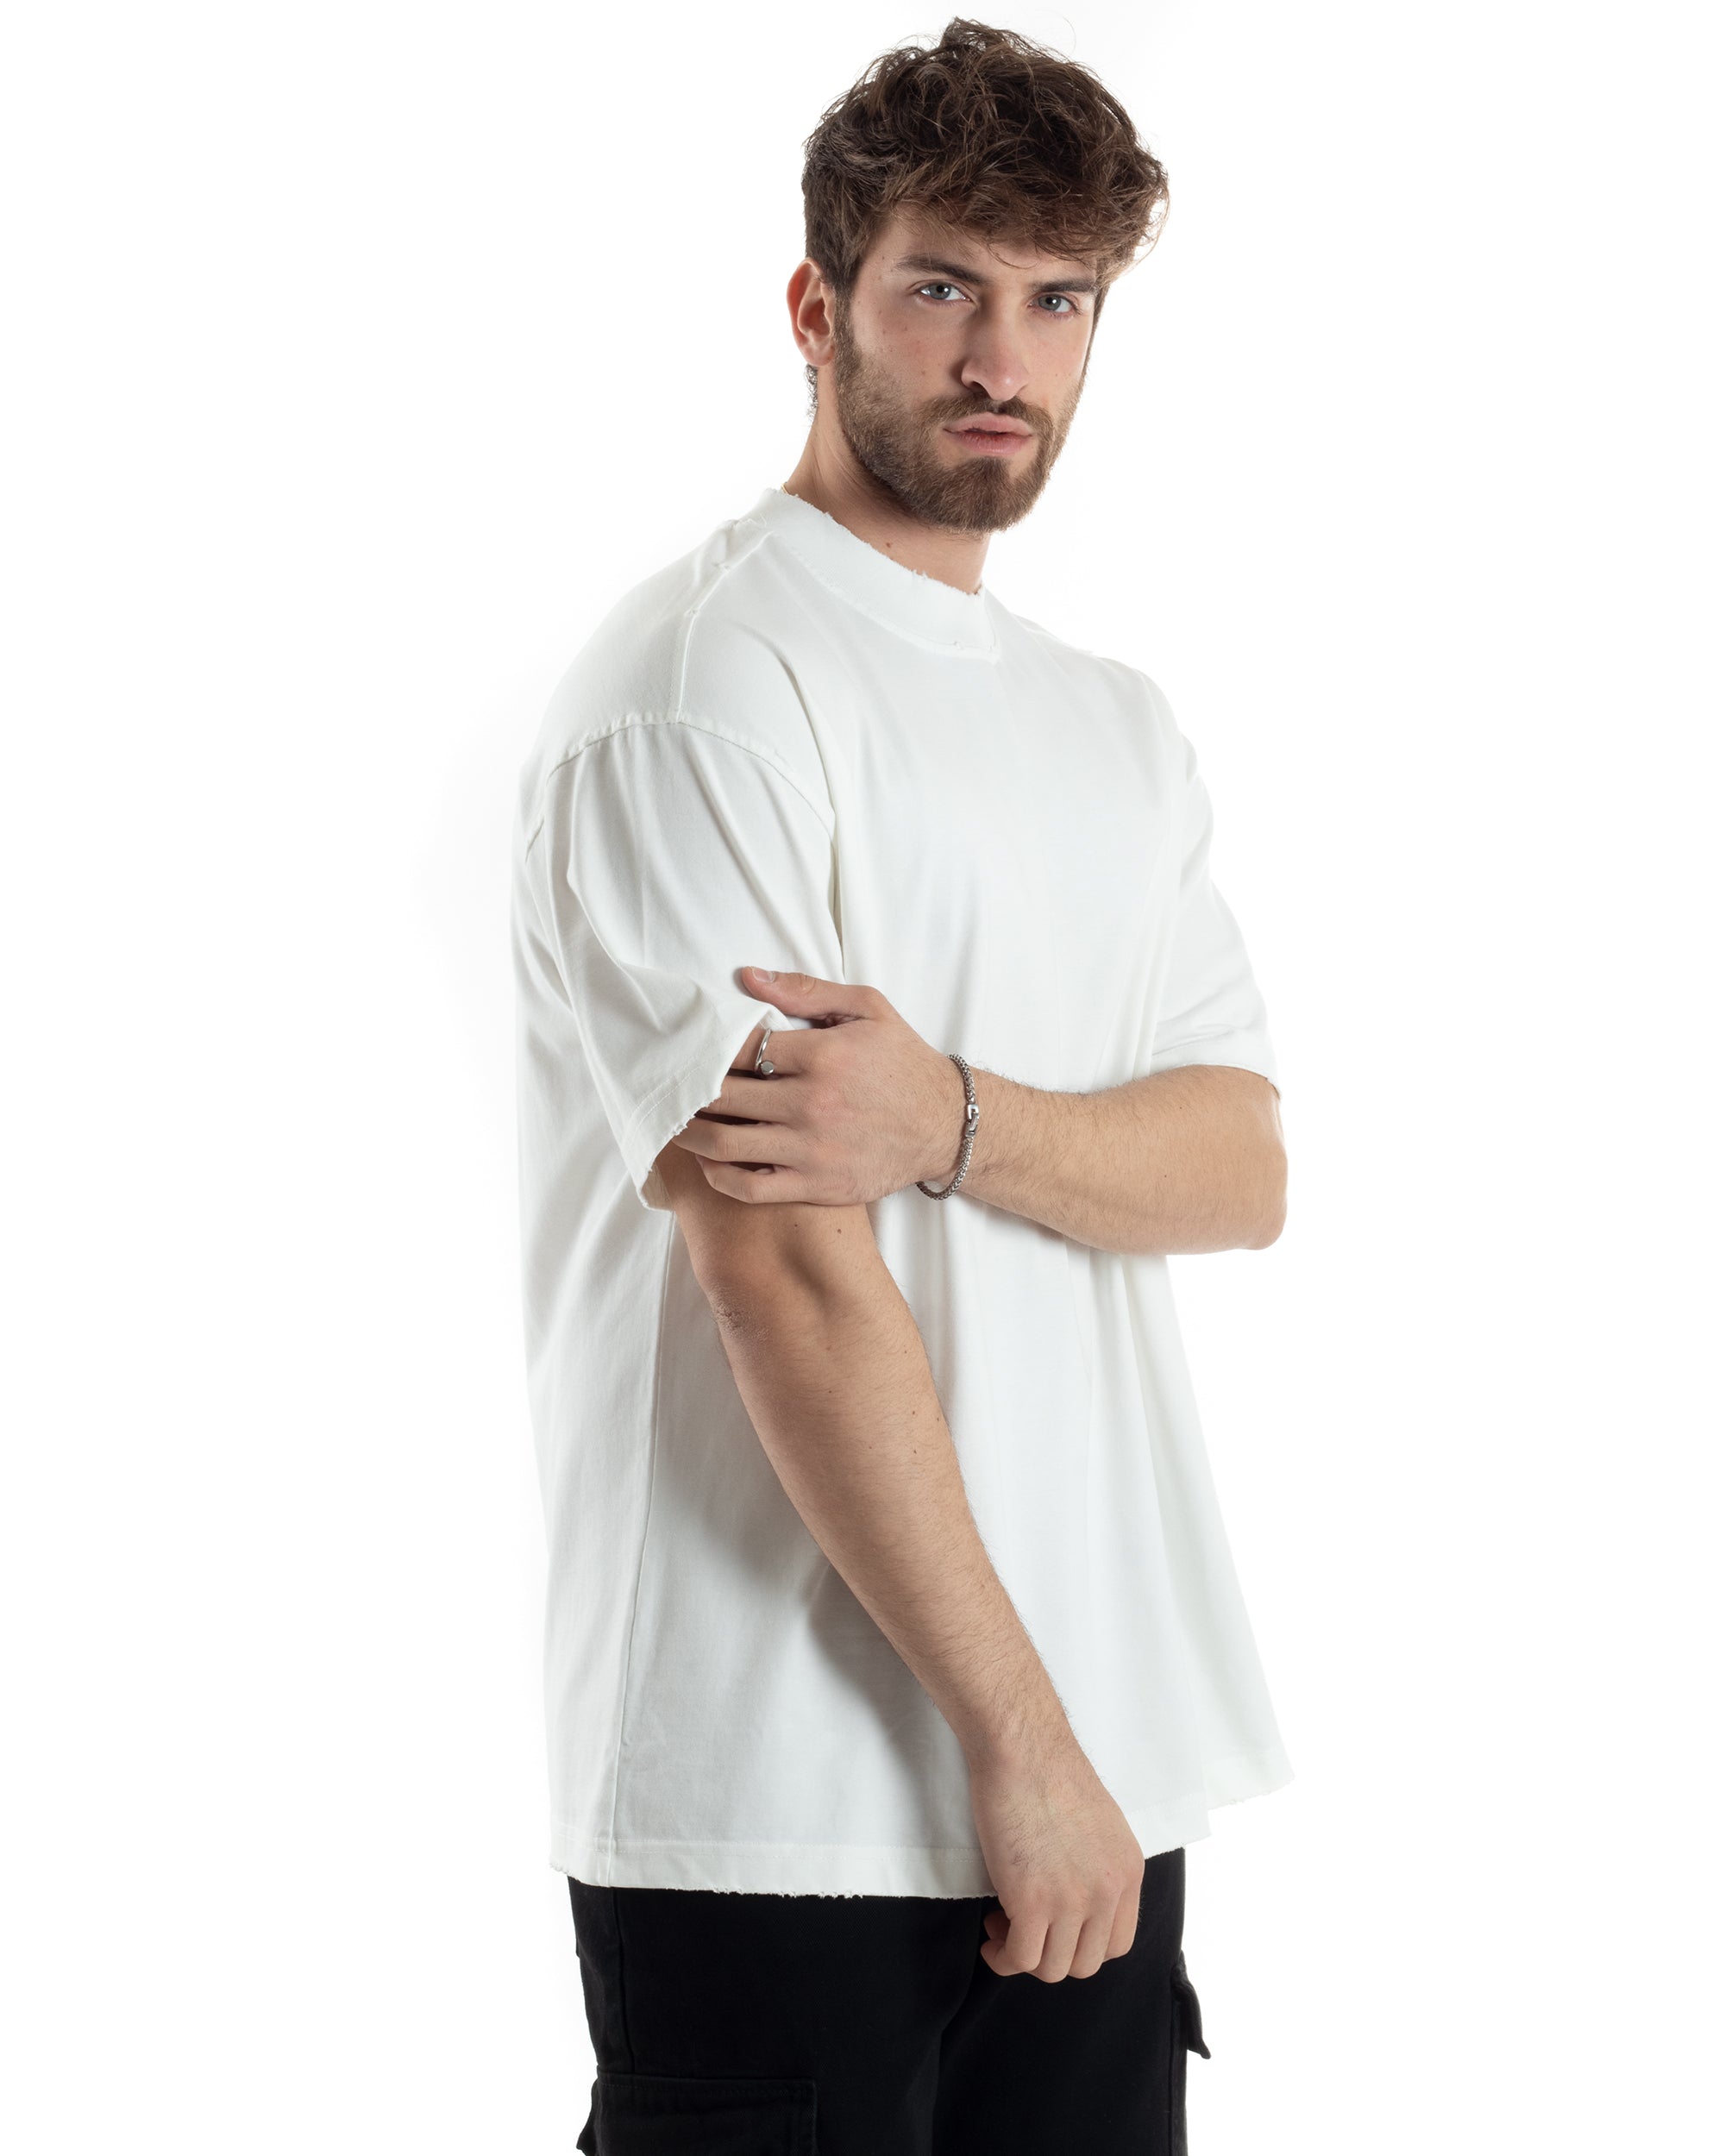 T-shirt Uomo Girocollo Boxy Fit Cotone Basic Con Rotture Relaxed Fit Gola Alta Bianco GIOSAL-TS3017A